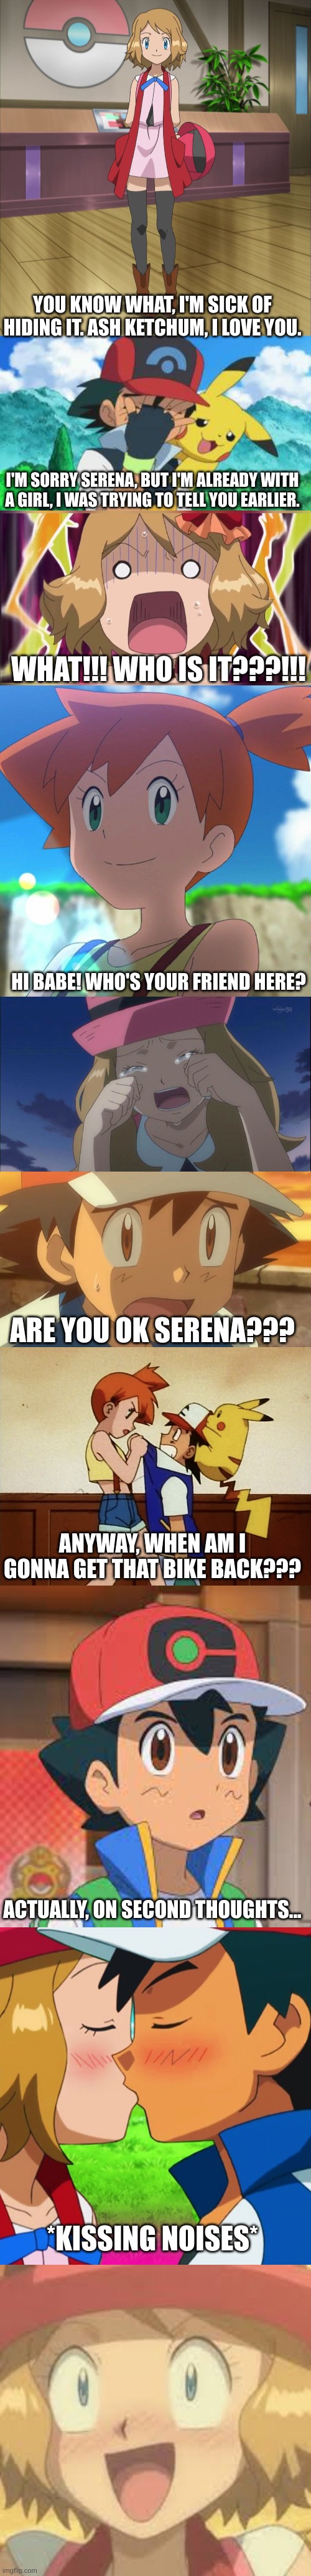 Ash finally gets with Serena | YOU KNOW WHAT, I'M SICK OF HIDING IT. ASH KETCHUM, I LOVE YOU. I'M SORRY SERENA, BUT I'M ALREADY WITH A GIRL, I WAS TRYING TO TELL YOU EARLIER. WHAT!!! WHO IS IT???!!! HI BABE! WHO'S YOUR FRIEND HERE? ARE YOU OK SERENA??? ANYWAY, WHEN AM I GONNA GET THAT BIKE BACK??? ACTUALLY, ON SECOND THOUGHTS... *KISSING NOISES* | image tagged in amourshipping | made w/ Imgflip meme maker